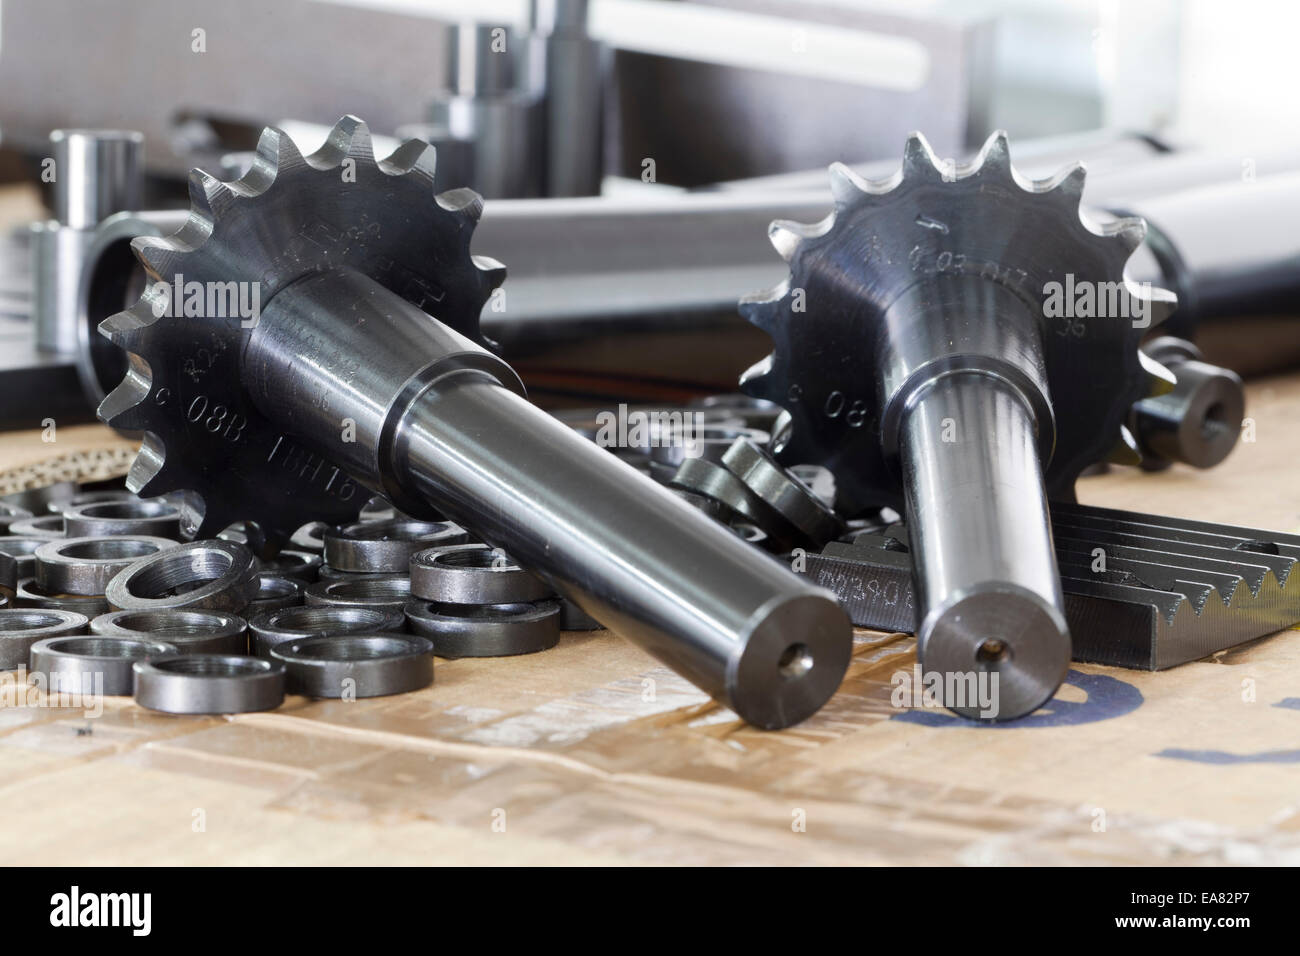 Machine engine components Engine Parts on table Stock Photo